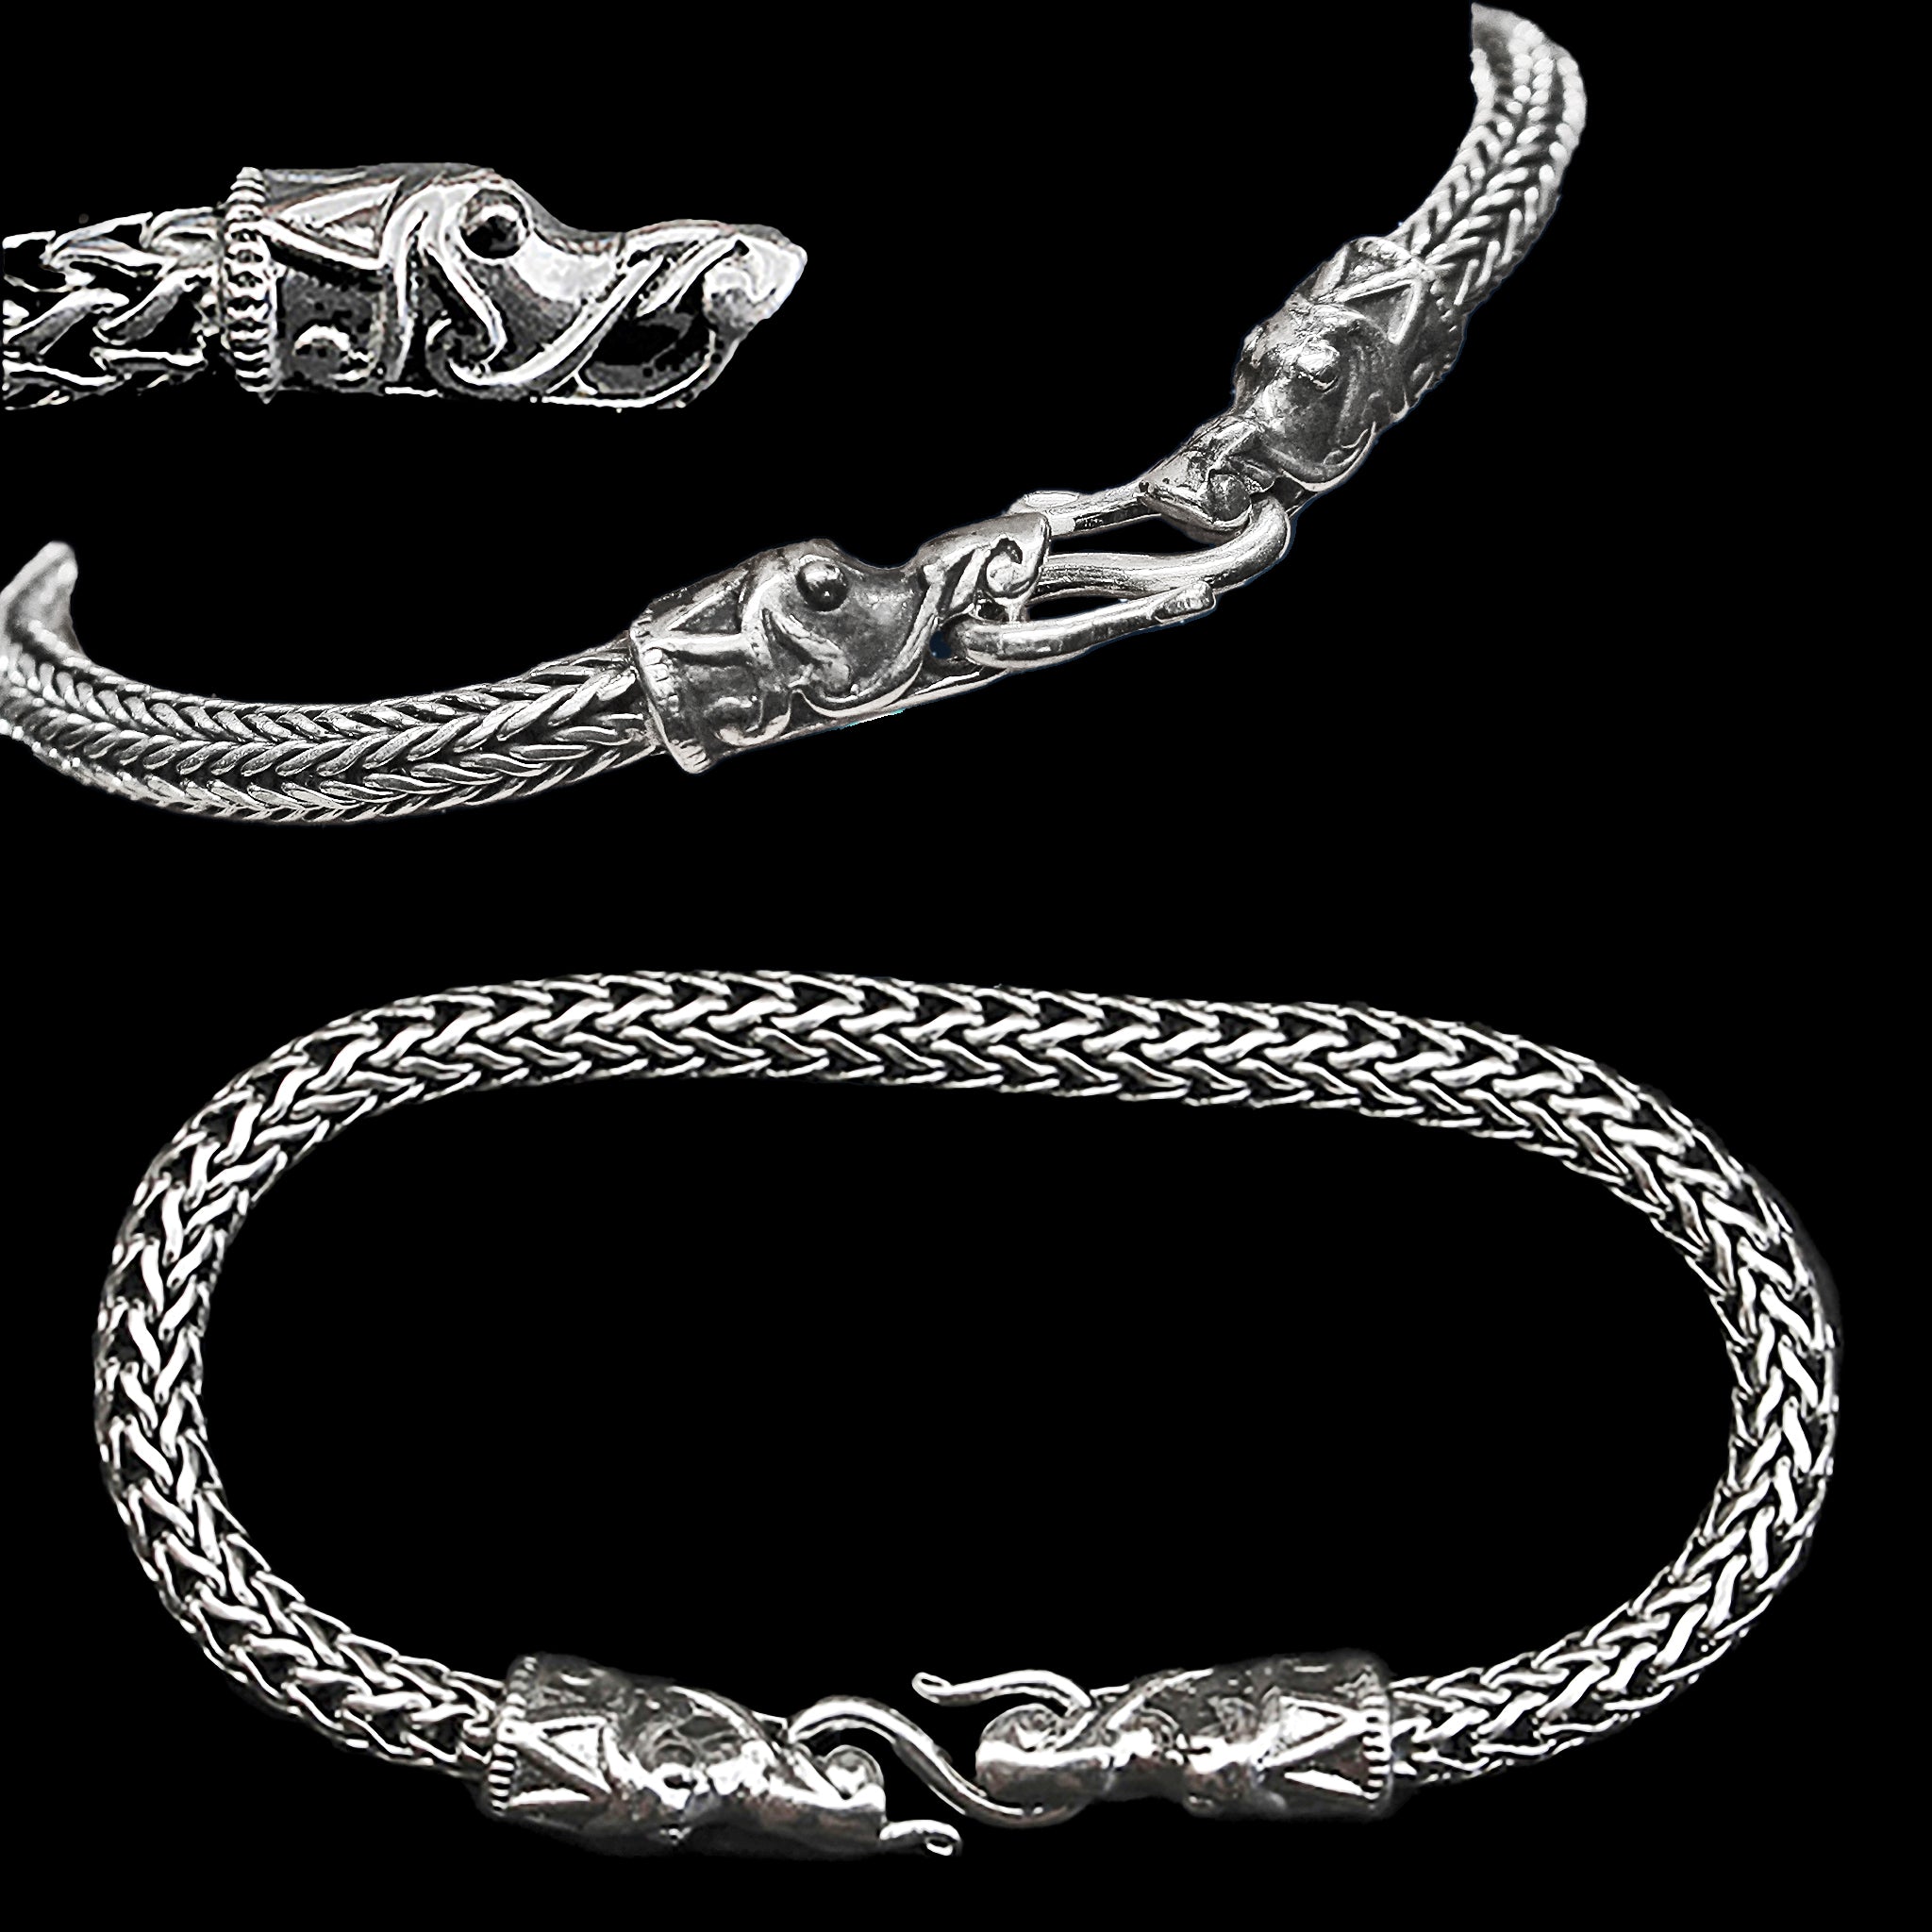 5mm Silver Snake Bracelet With Gotlandic Dragon Heads - Various Angles